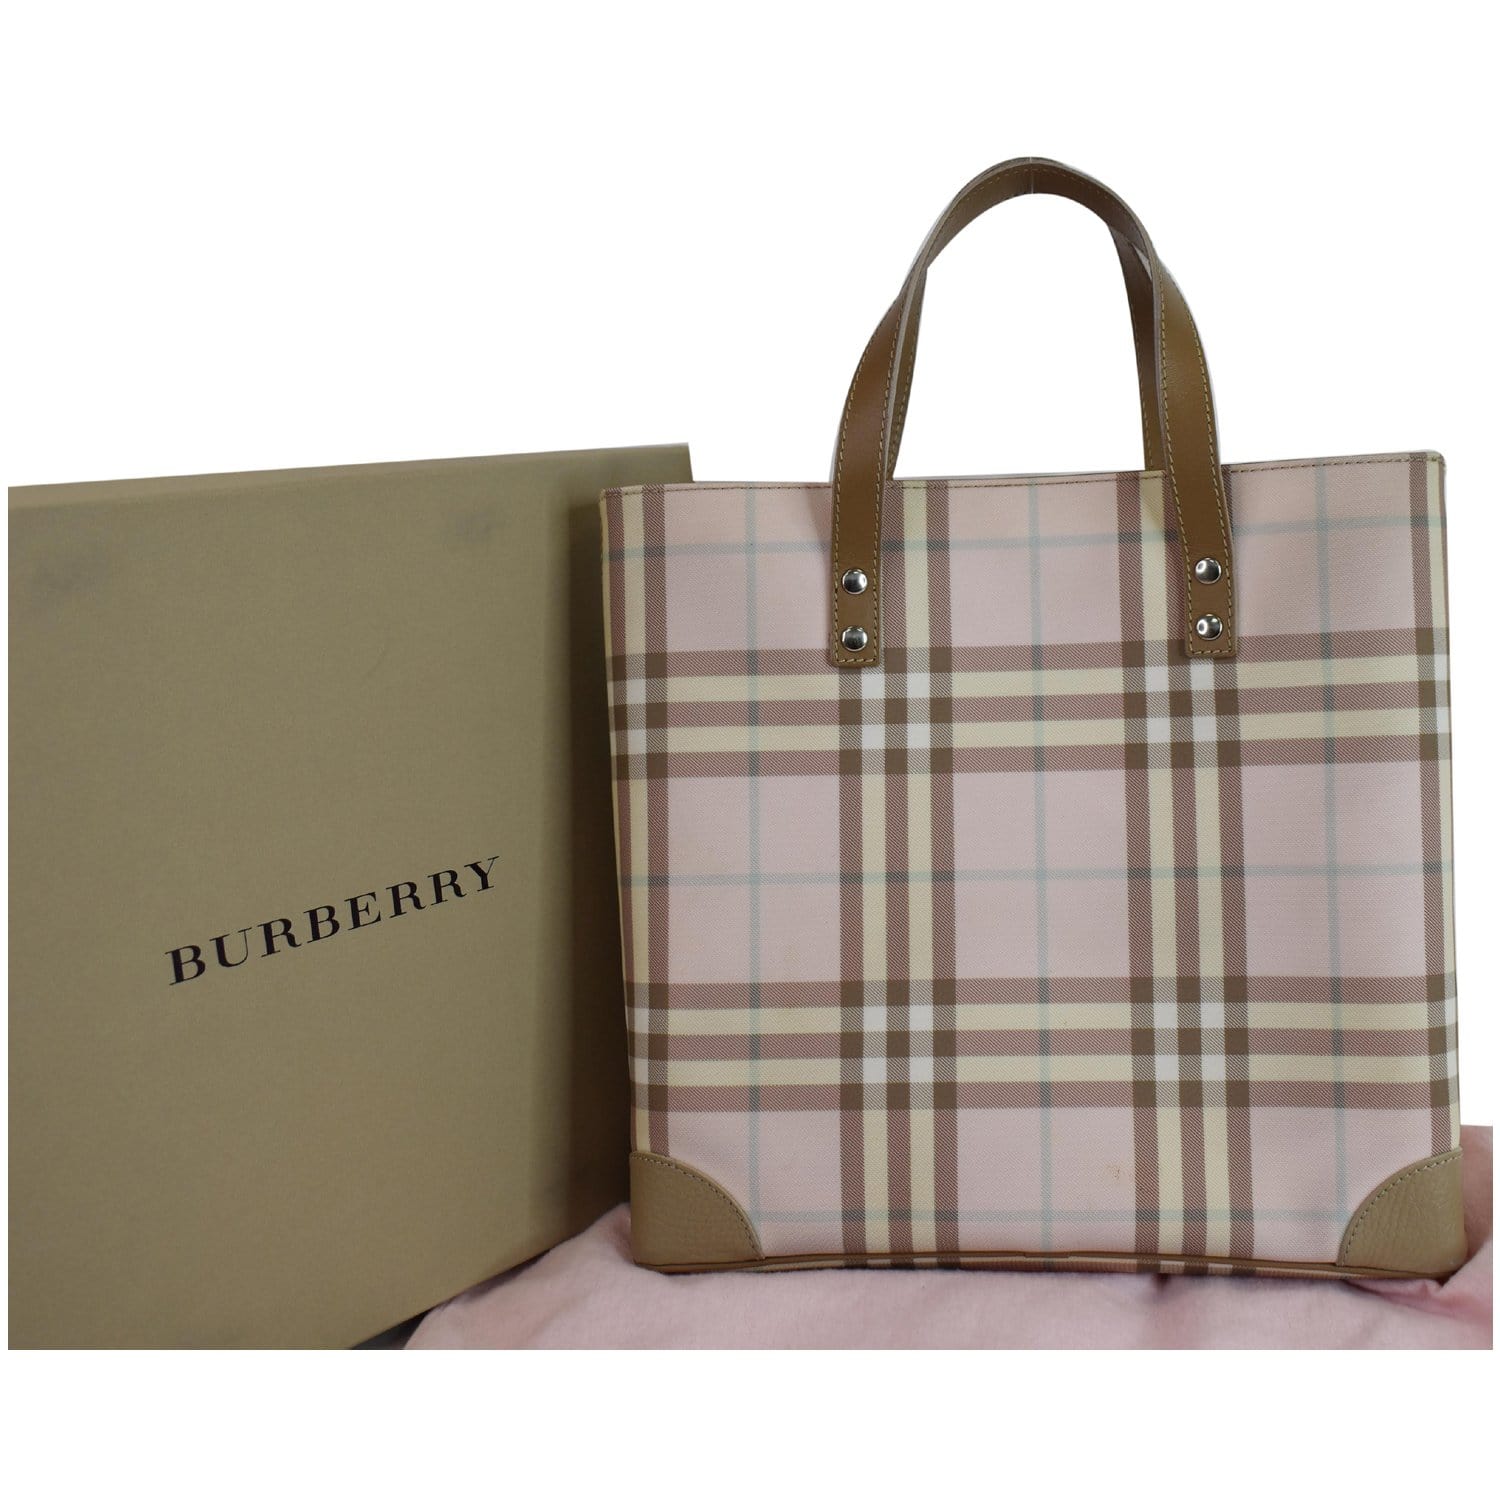 BURBERRY: London bag in cotton - Beige | BURBERRY tote bags 8063120 online  at GIGLIO.COM